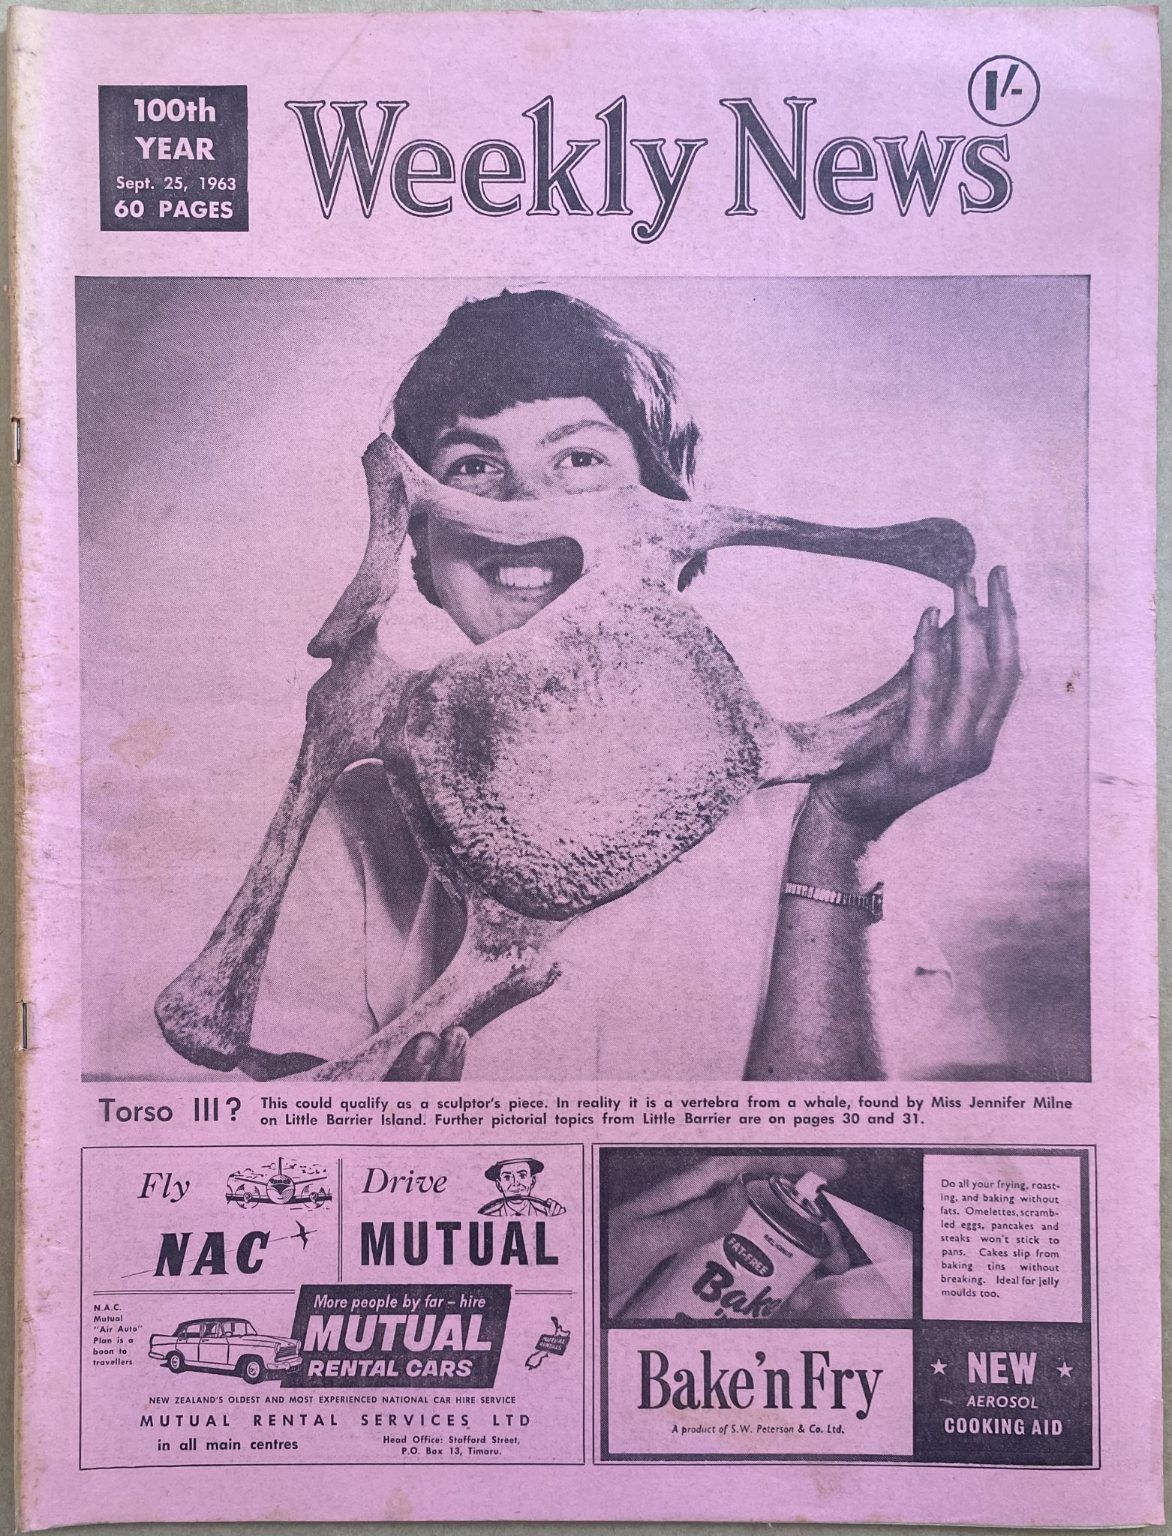 OLD NEWSPAPER: The Weekly News, No. 5209, 25 September 1963